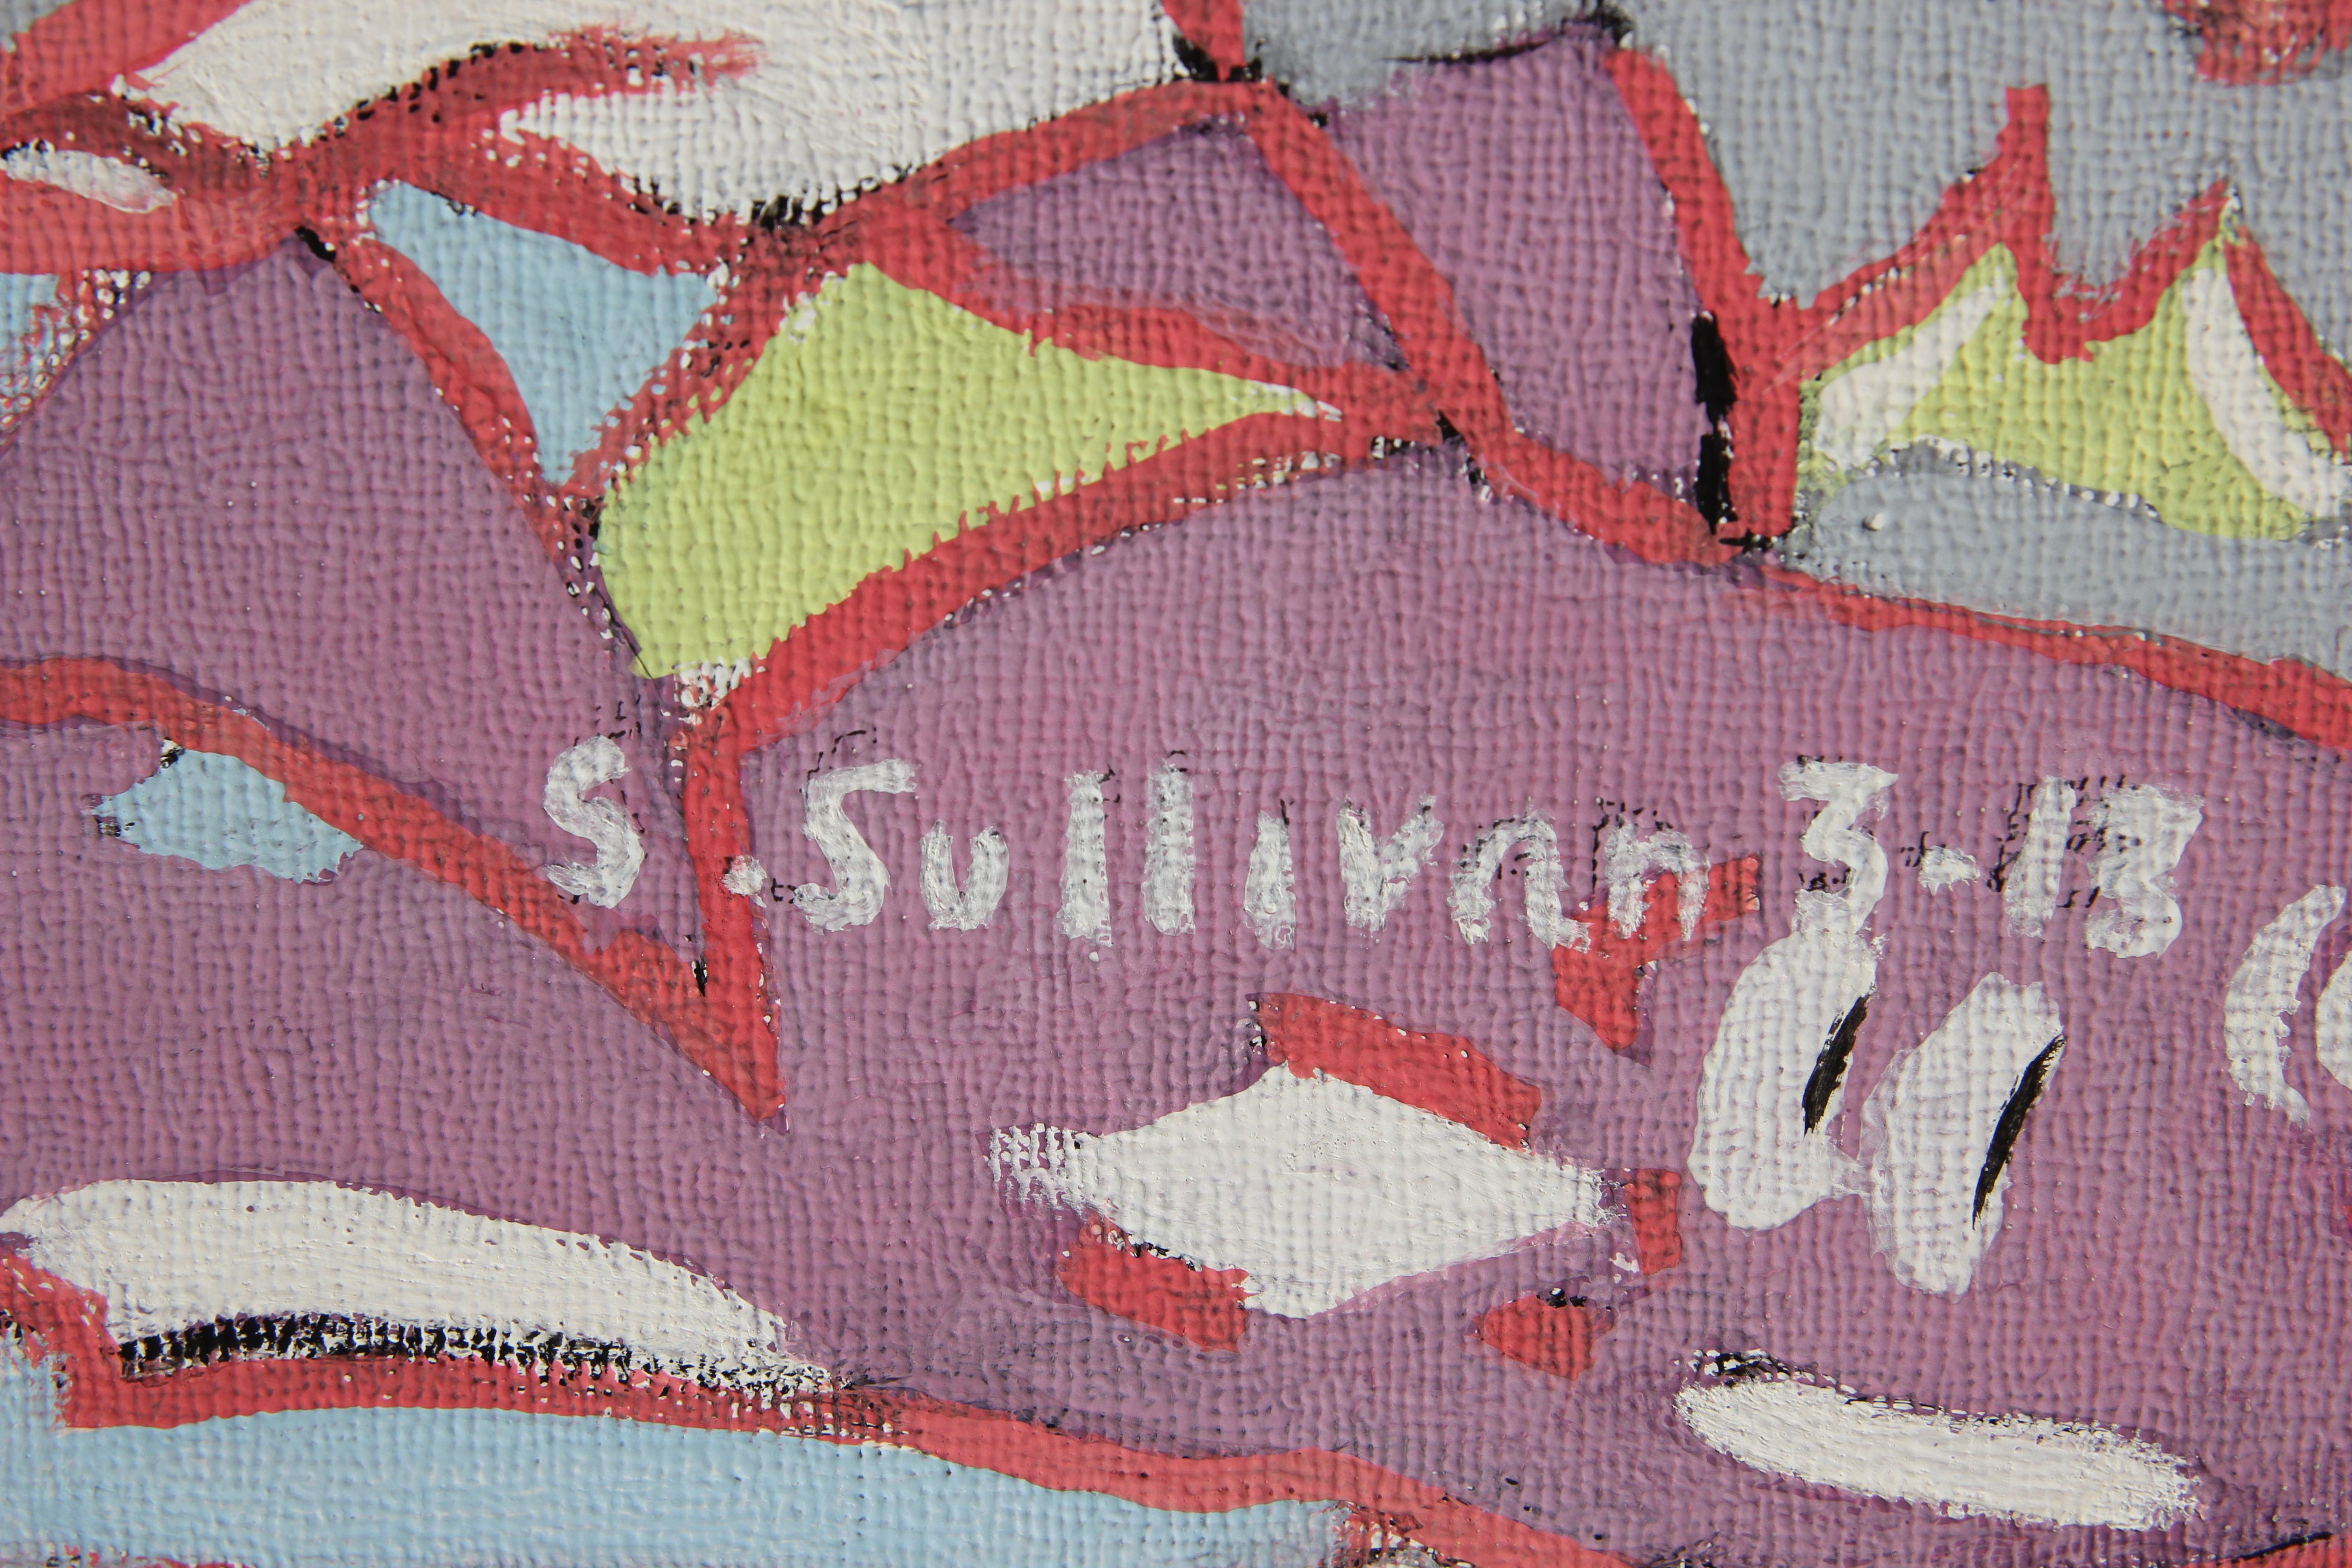 Pink tonal painting of a collage of fish. The painting is done with casein paint on artist board. The piece is signed by the artist and dated. The work is not framed.

Artist Biography:
Stella Sullivan was born in Houston, Texas. She earned her